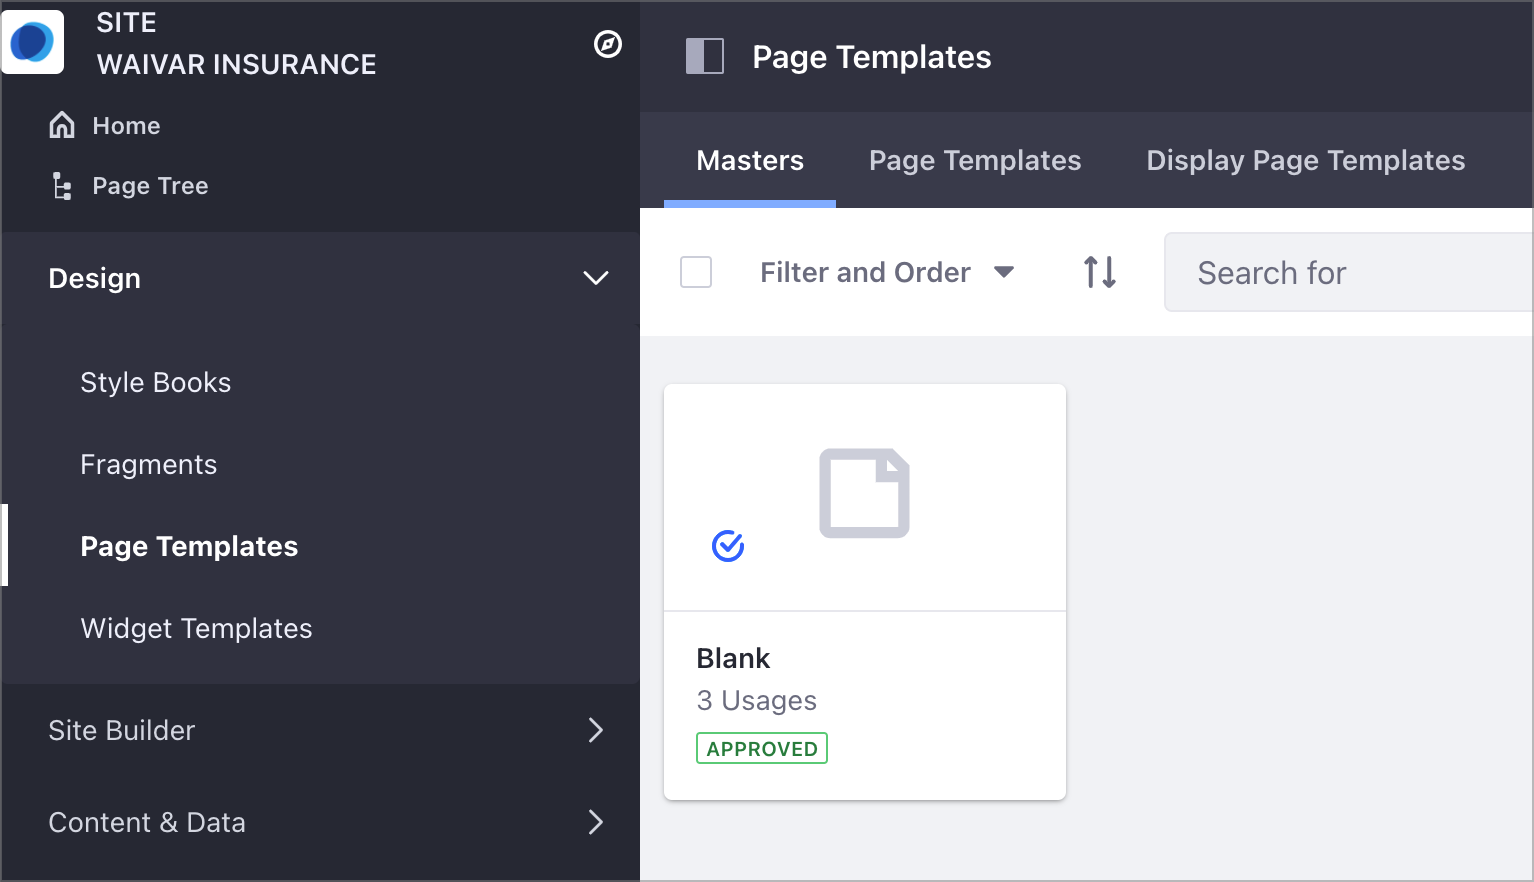 The Blank Master Page Template is the default for Pages, and Page Templates.